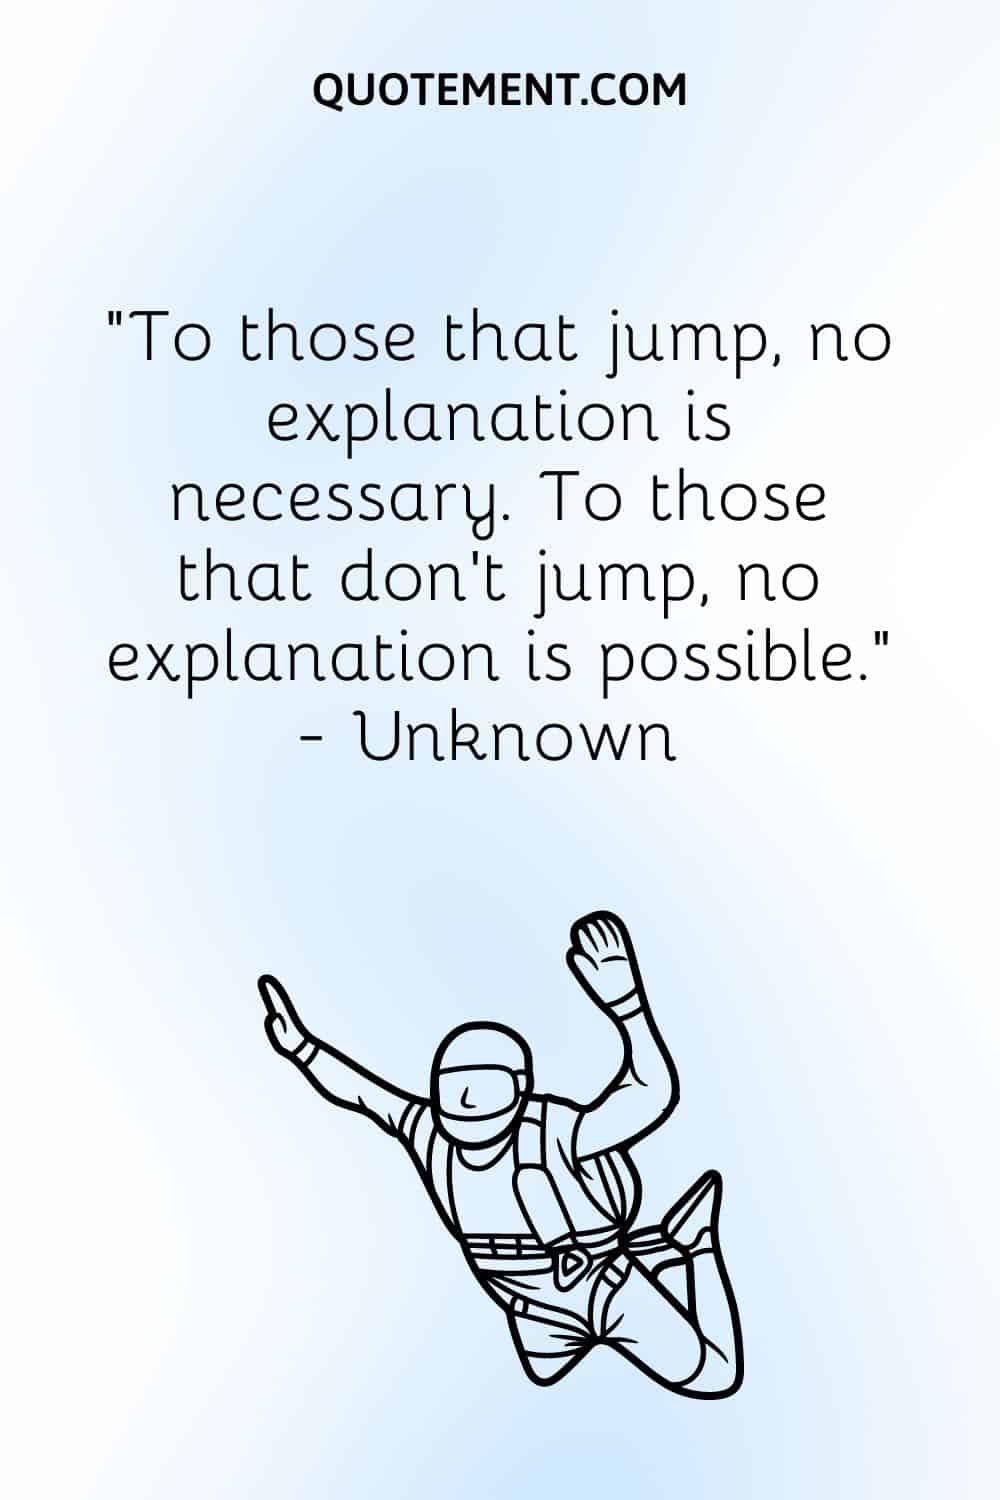 To those that jump, no explanation is necessary